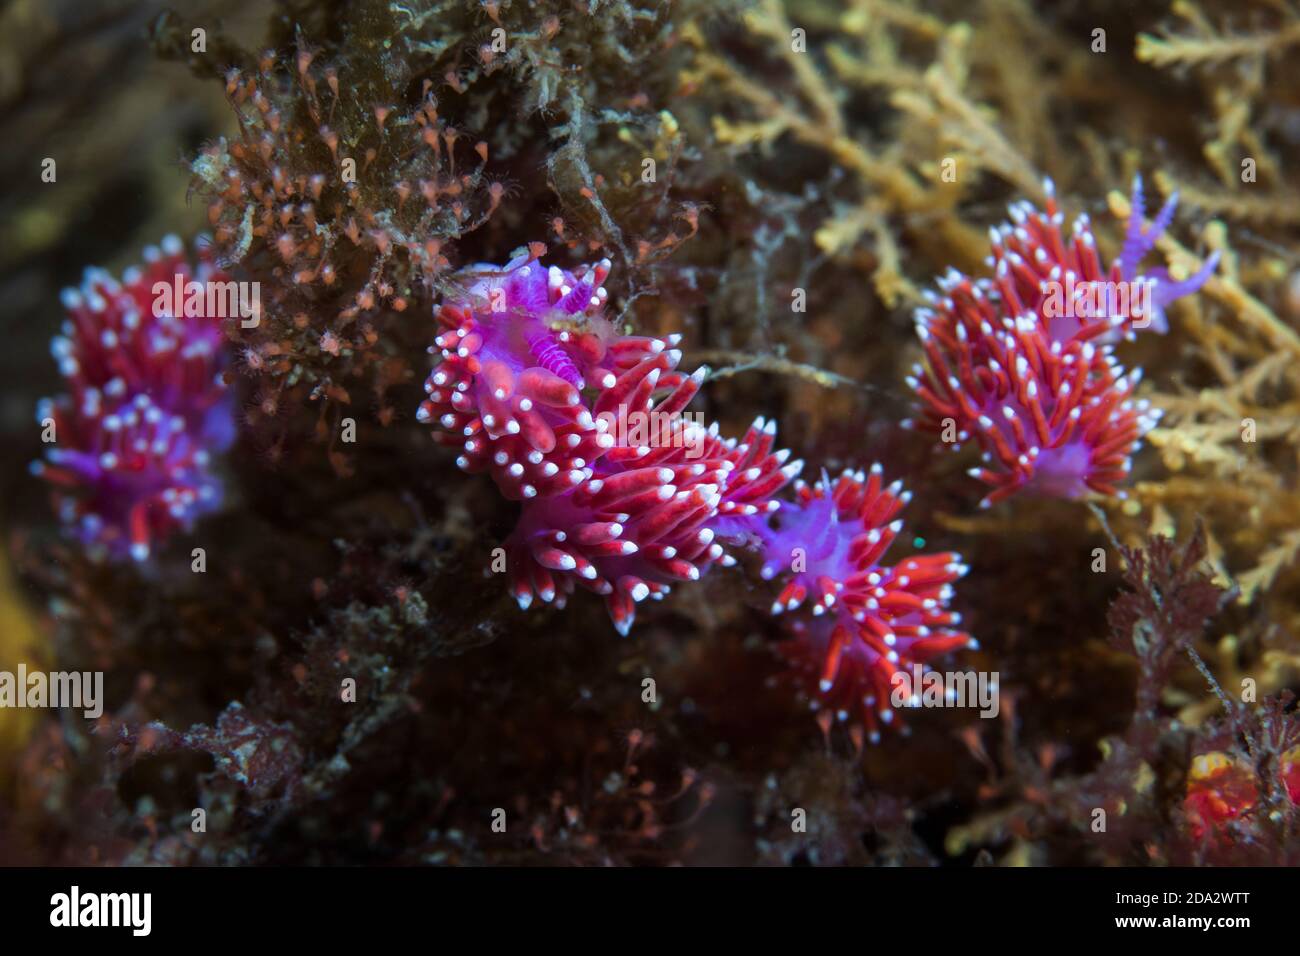 A group of Purple lady nudibranchs (Flabellina funeka) slender purple-bodied aeolid with red cerata having white tips. Stock Photo